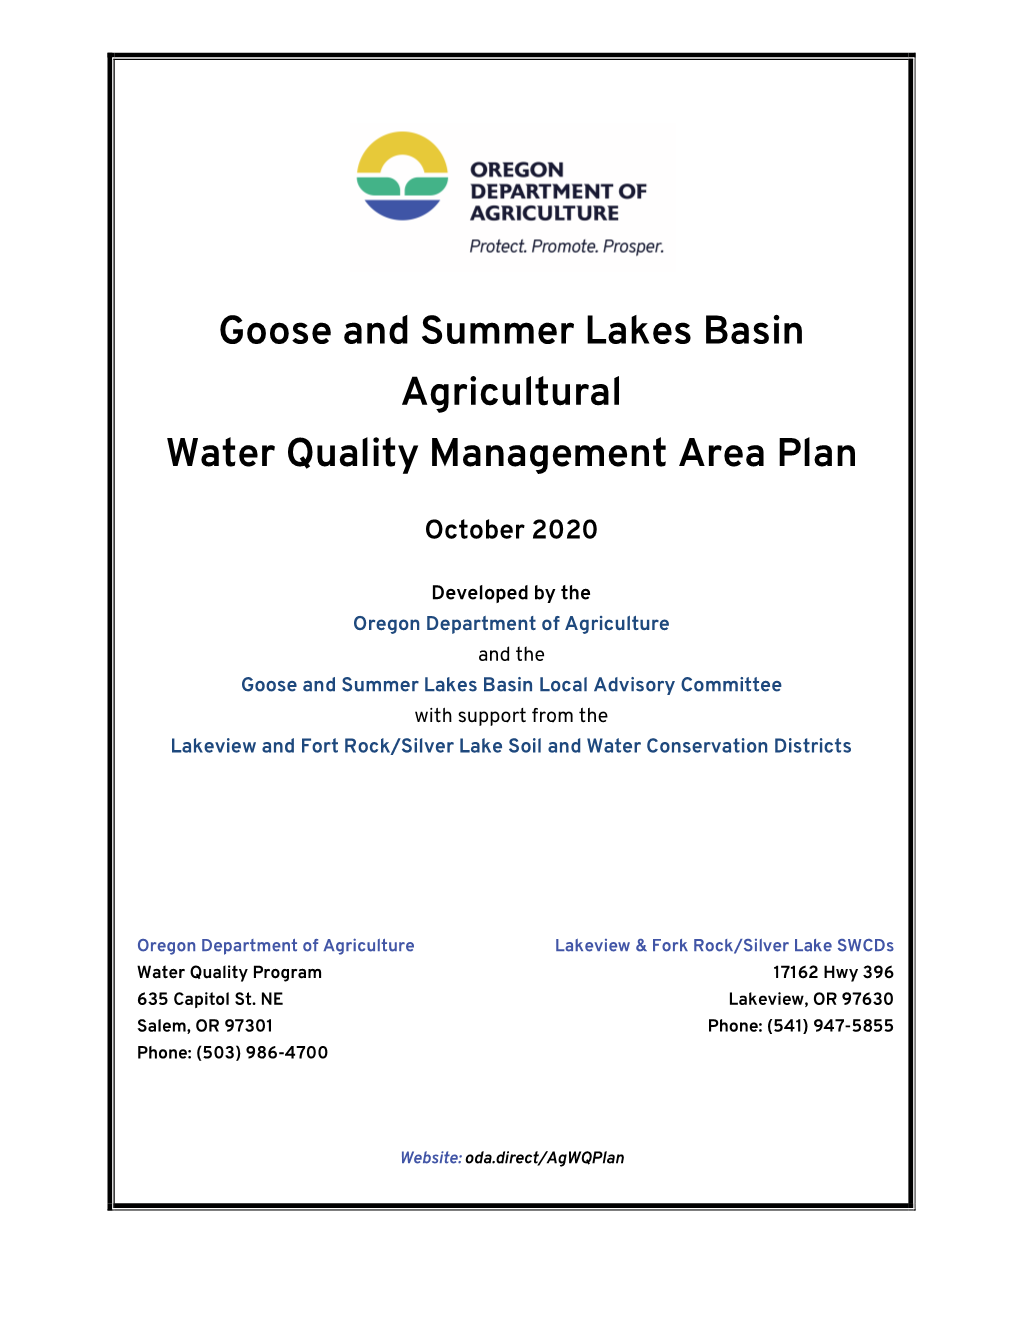 Goose and Summer Lakes Basin Agricultural Water Quality Management Area Plan